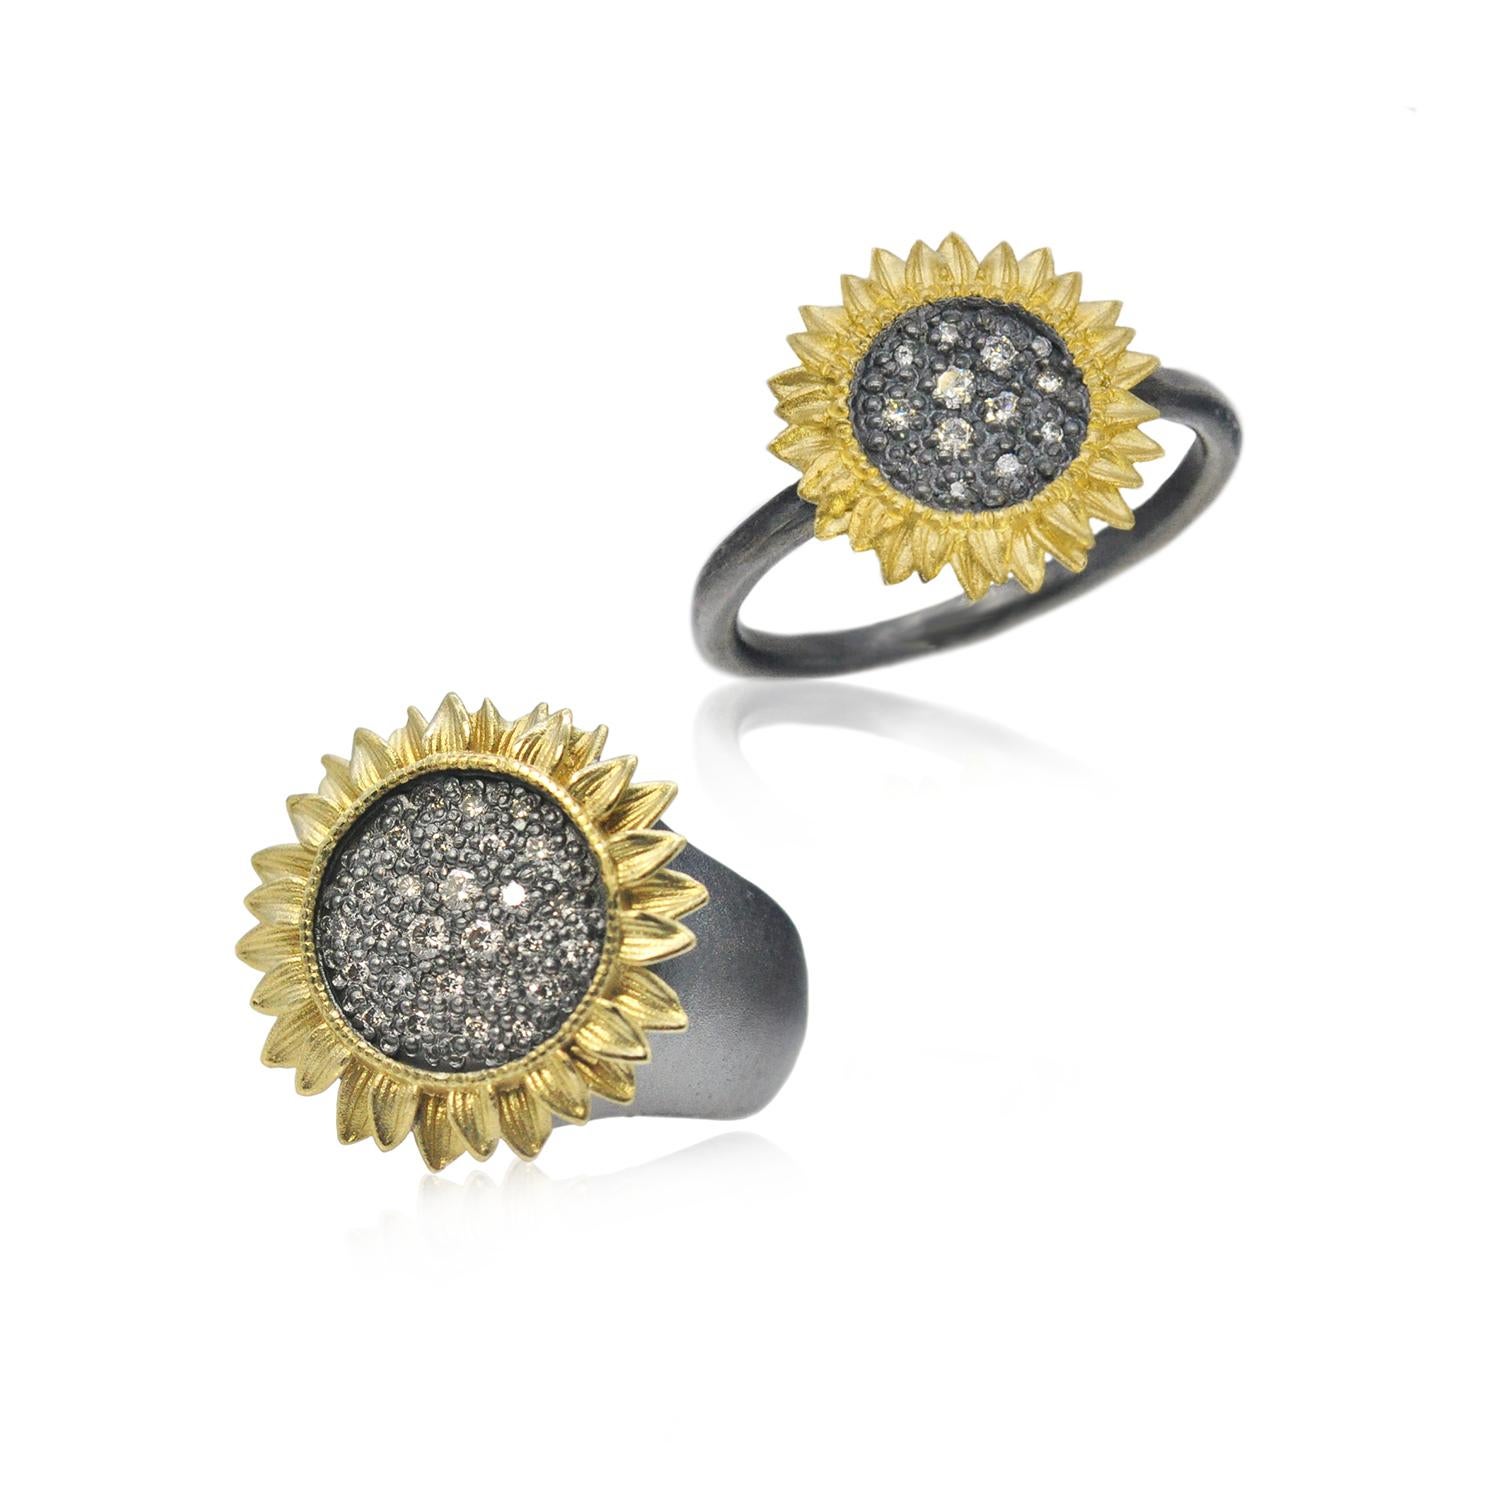 For Sale:  Sunflower Ring with Pave Set Diamonds in Oxidized Silver, Small 2